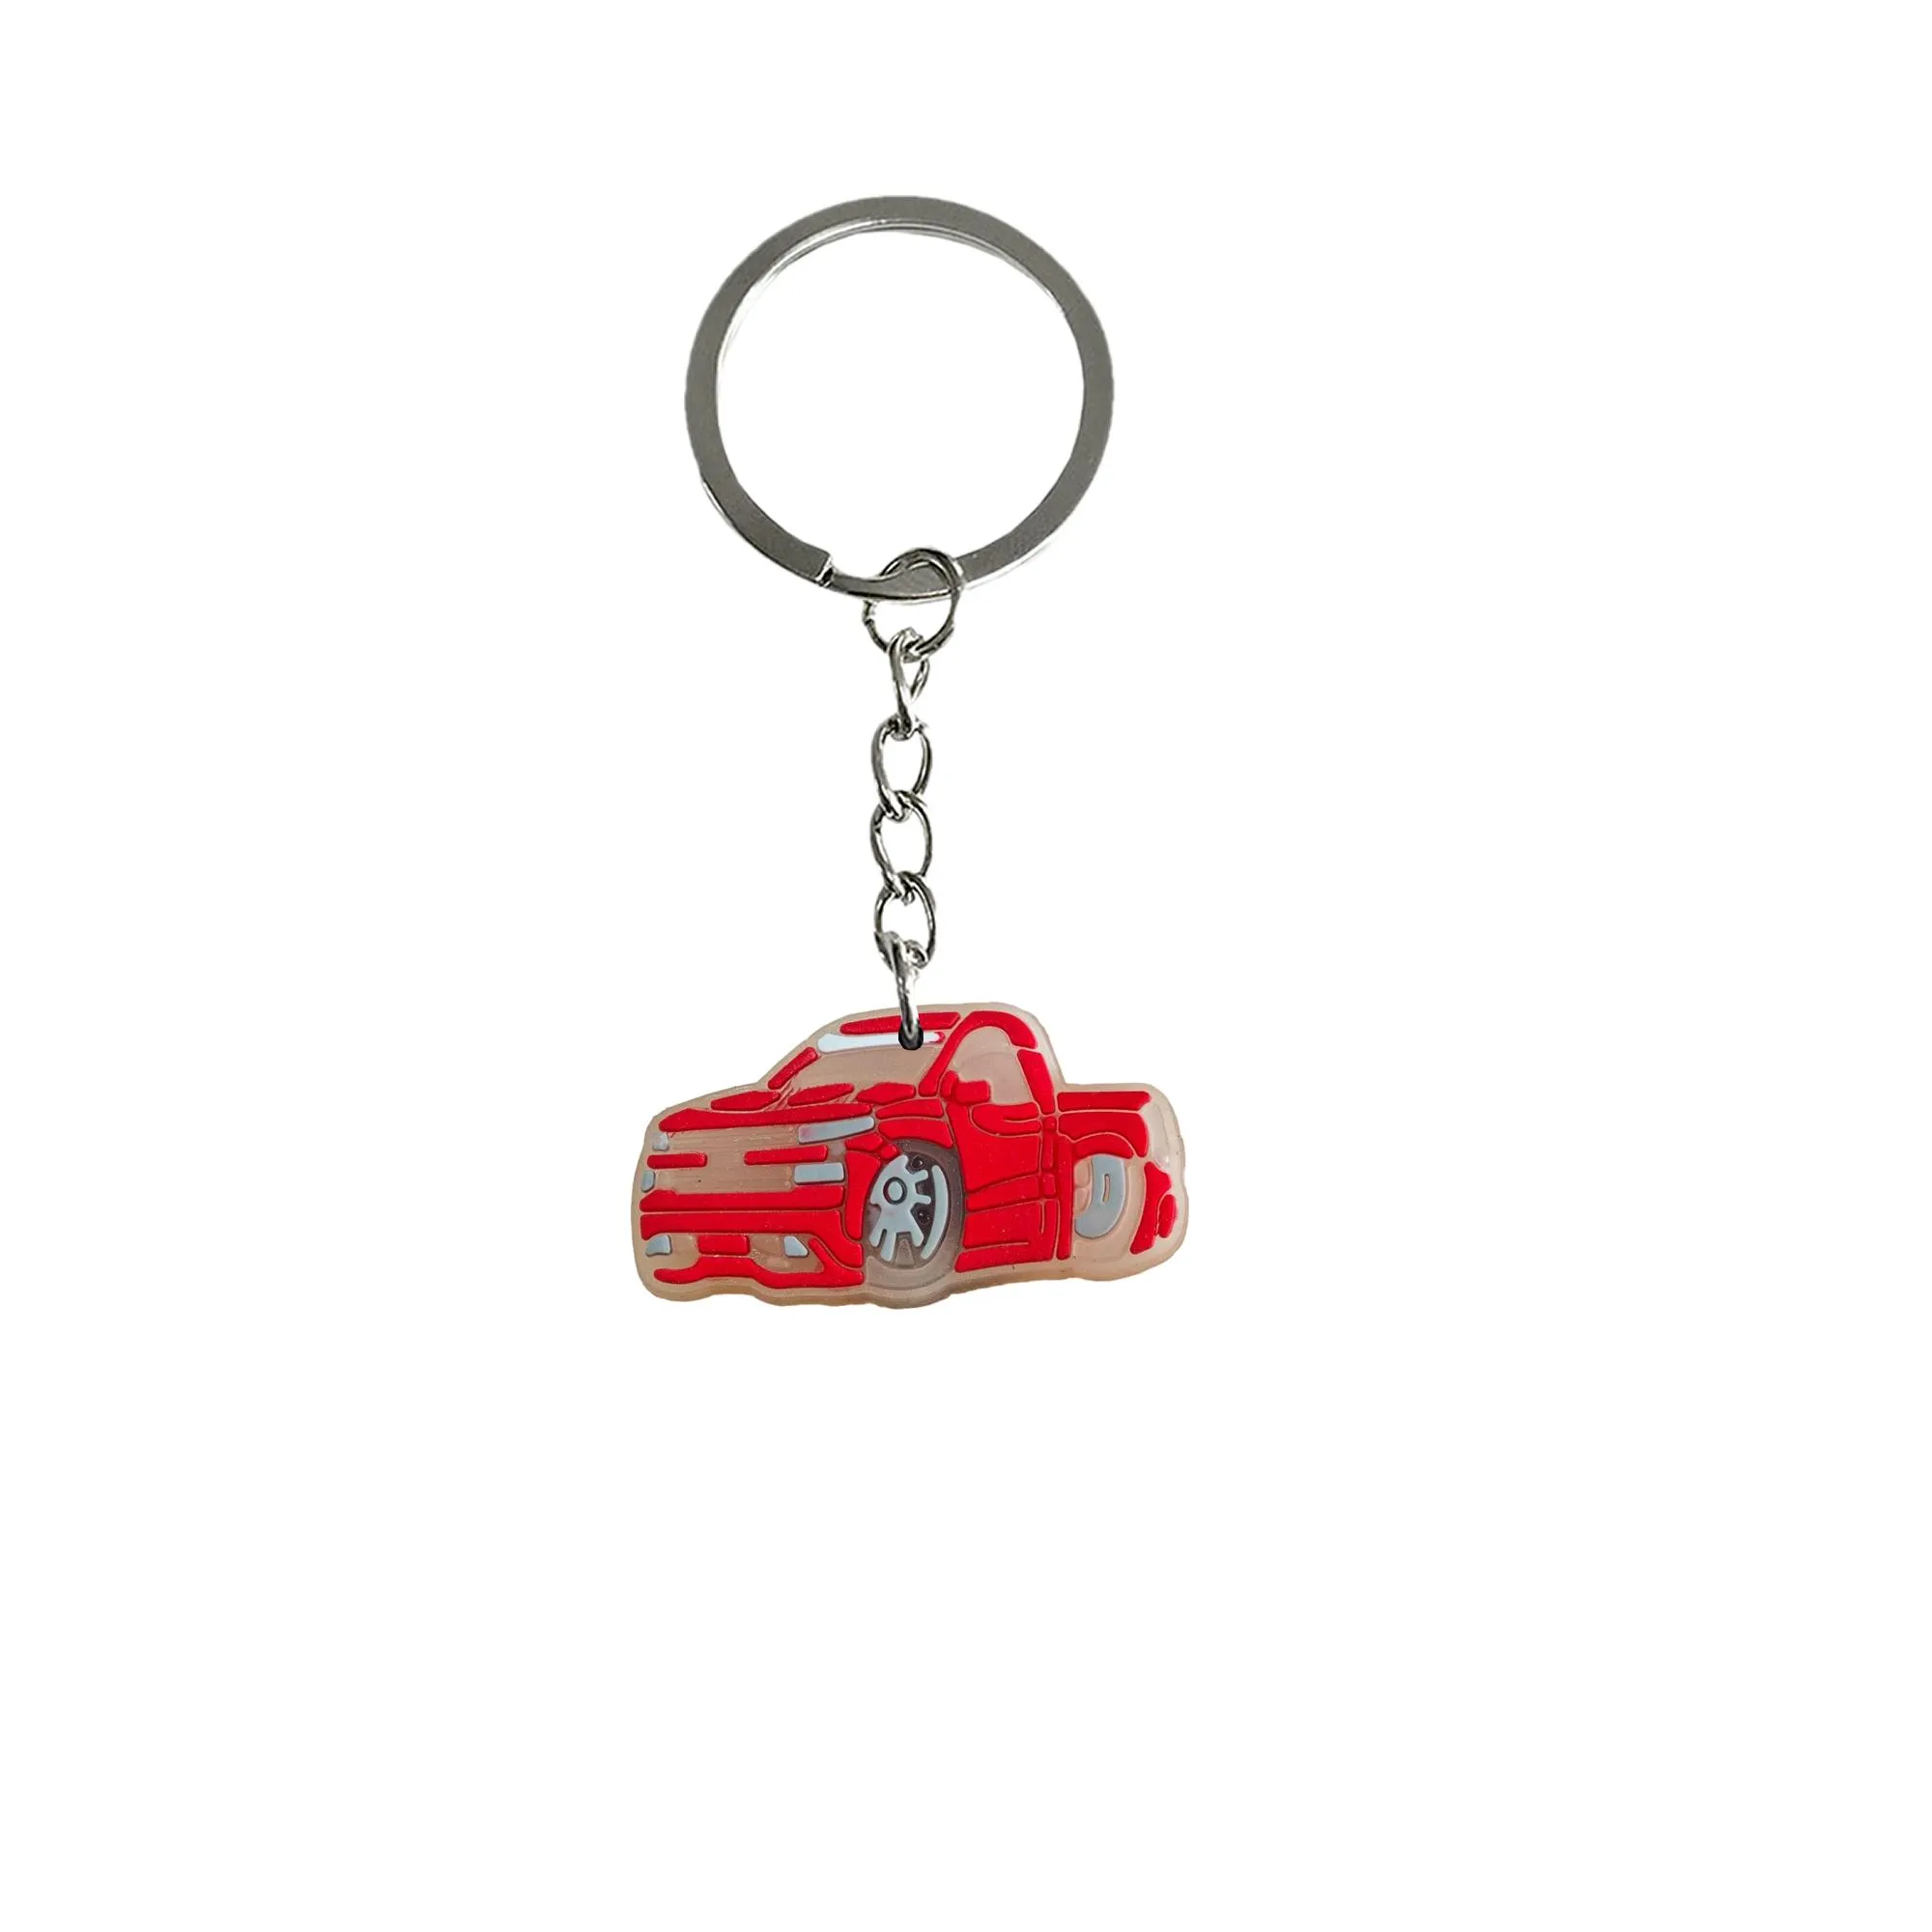 fluorescent cars 19 keychain keyring for backpack car charms pendants accessories kids birthday party favors keyrings bags suitable schoolbag couple key chains women cute silicone chain adult gift ring girls